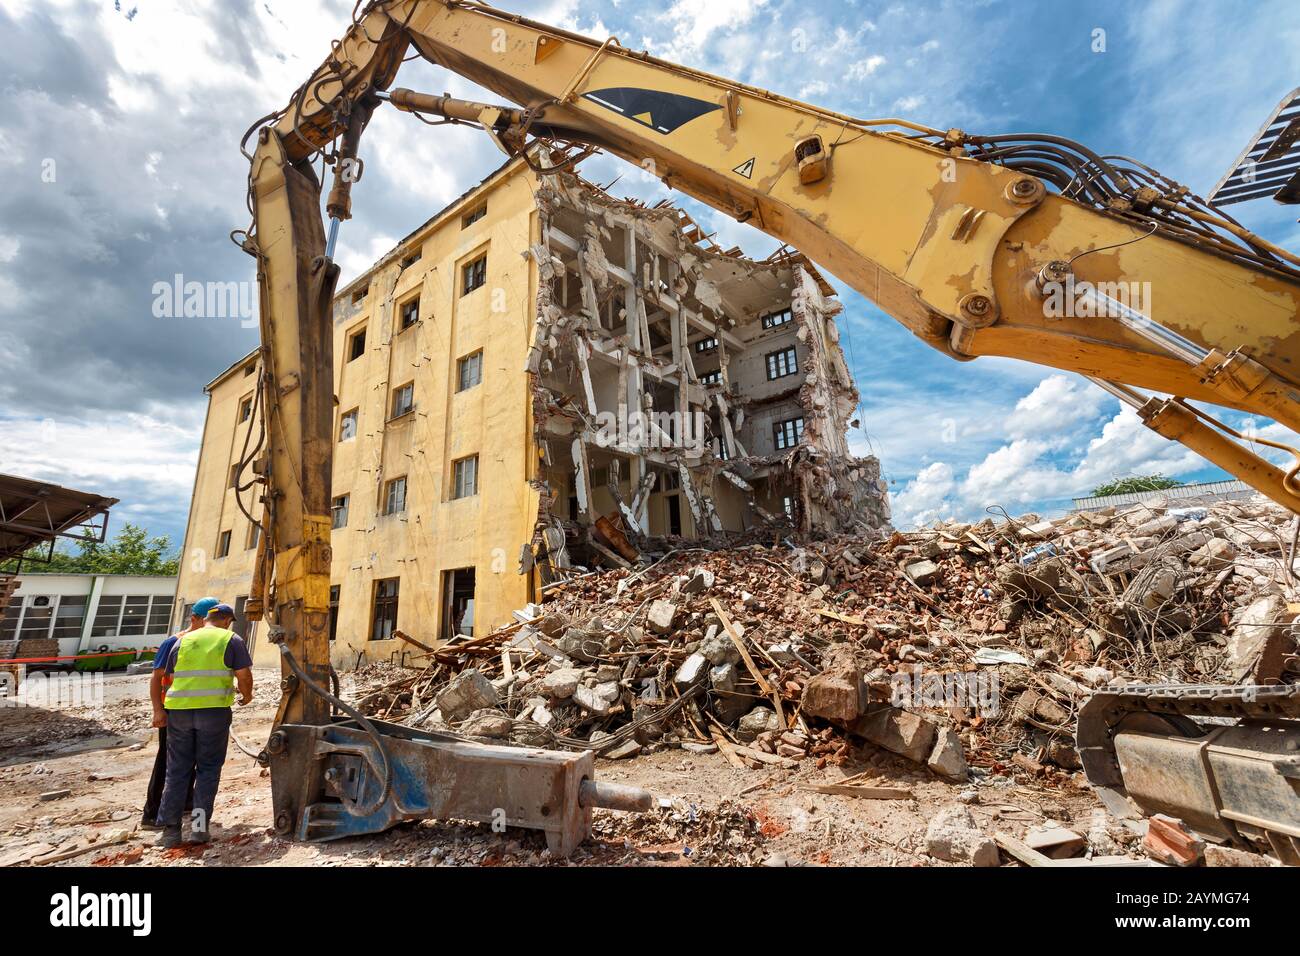 Ruins of demolished building. Heavy machinery surrounded with ruins. Construction industry concept. Stock Photo